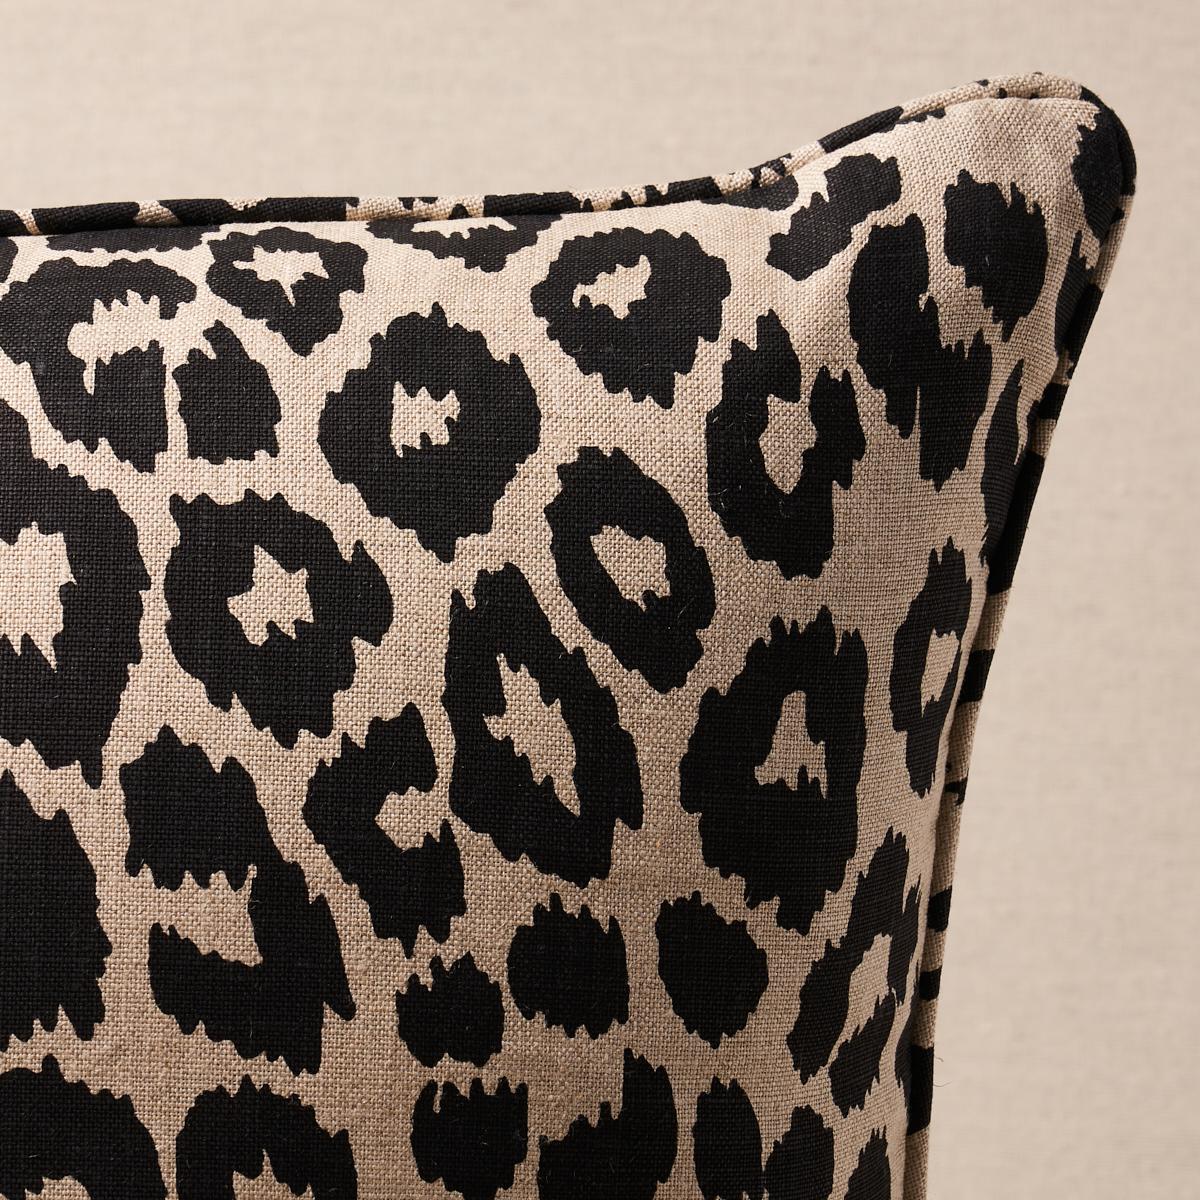 Iconic Leopard Pillow_EBONY/NATURAL